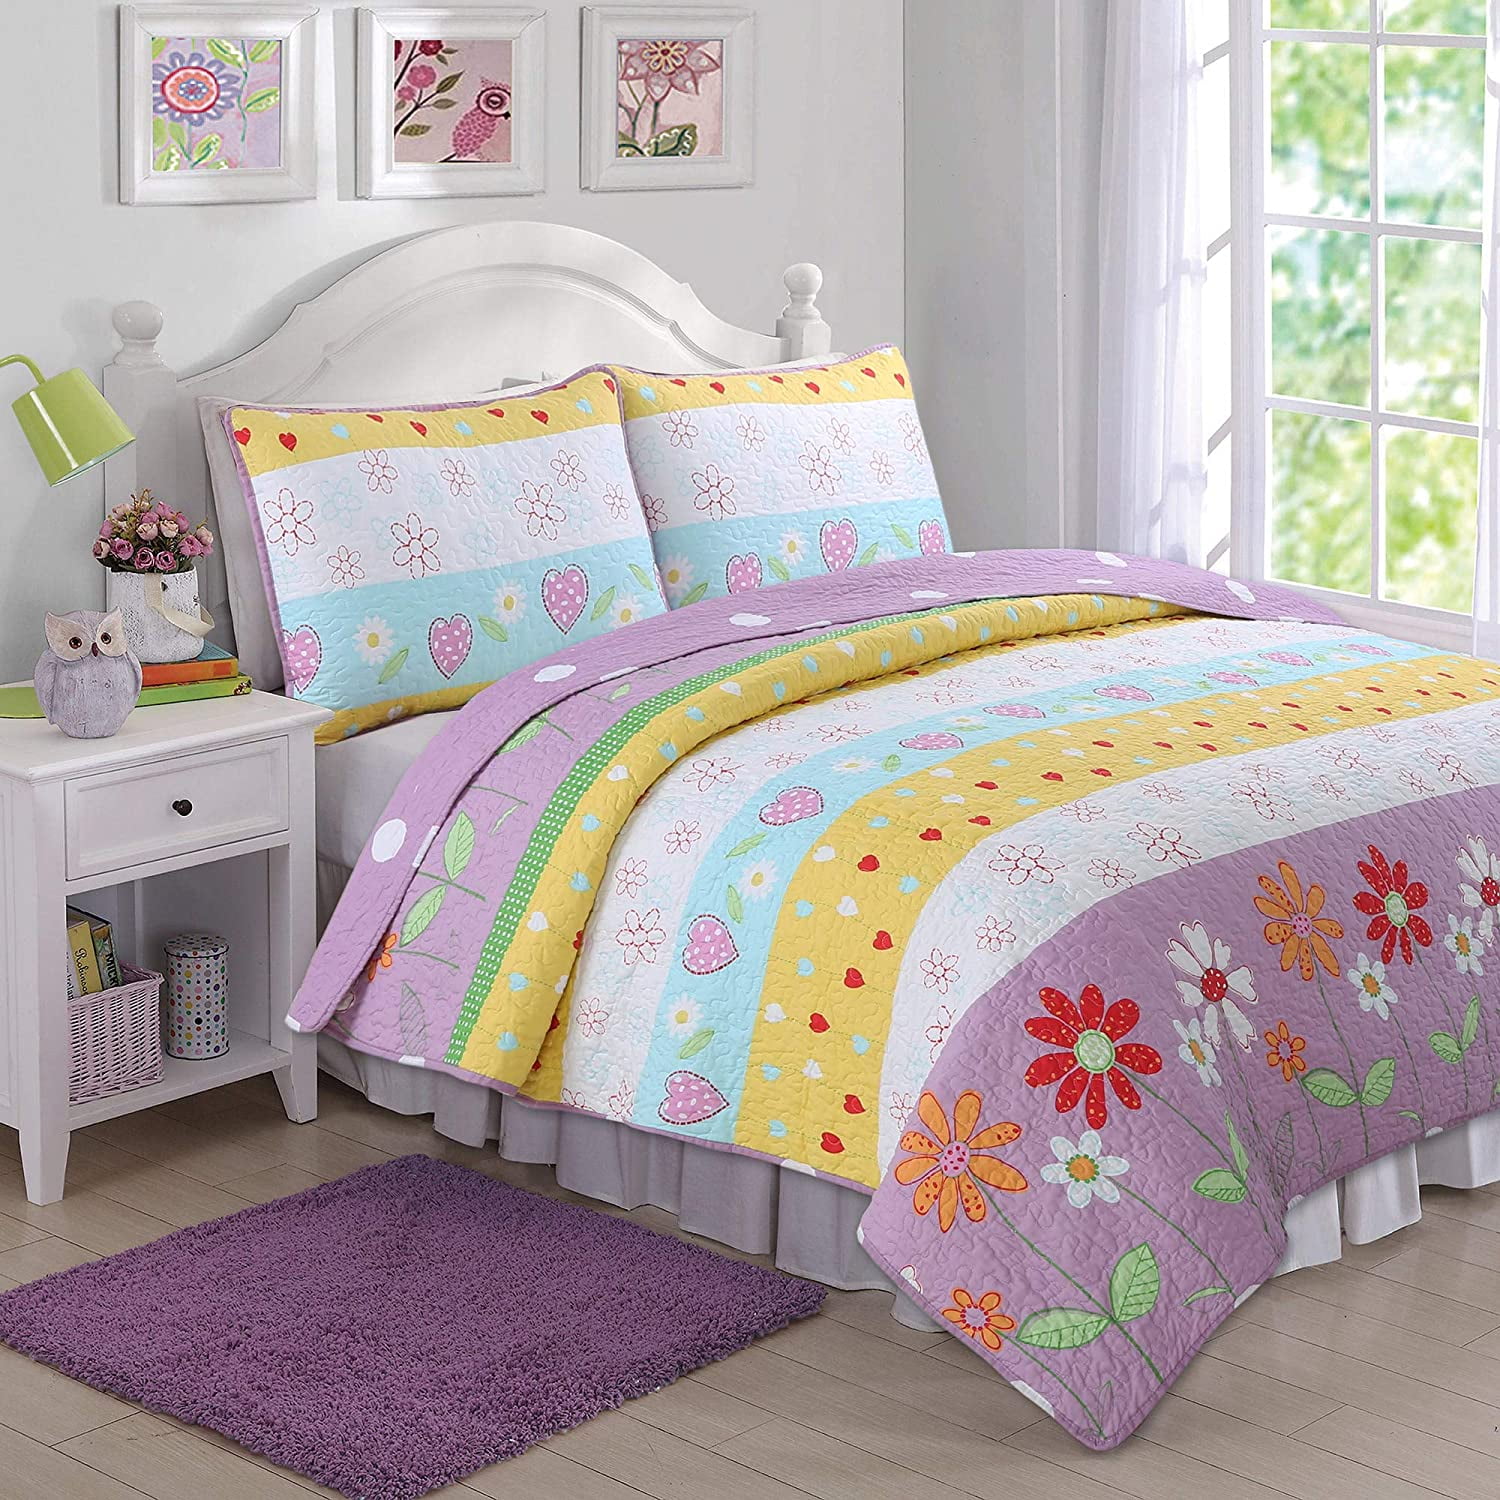 Details about   Mk Collection 4 Pc Full Size Sheet Set Teens/Girls Pink Flower New 